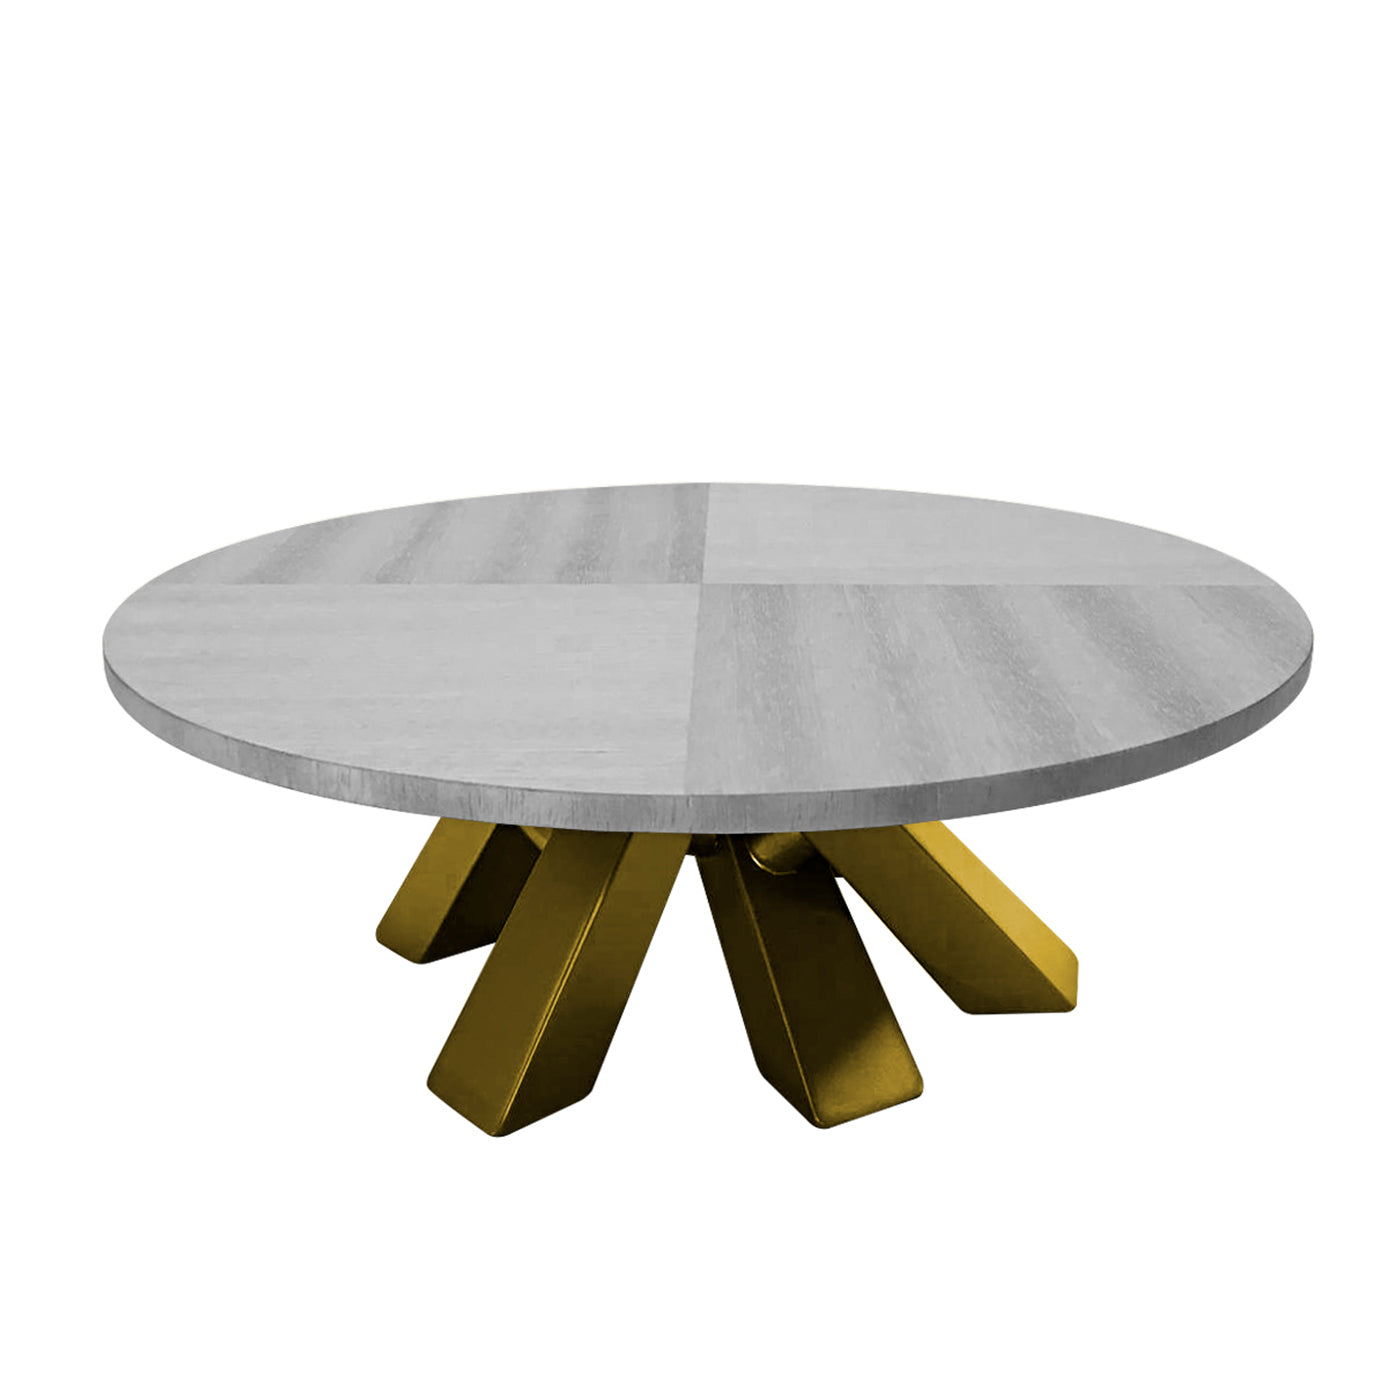 Ies Gray & Bronze Dining Table - Alternative view 1